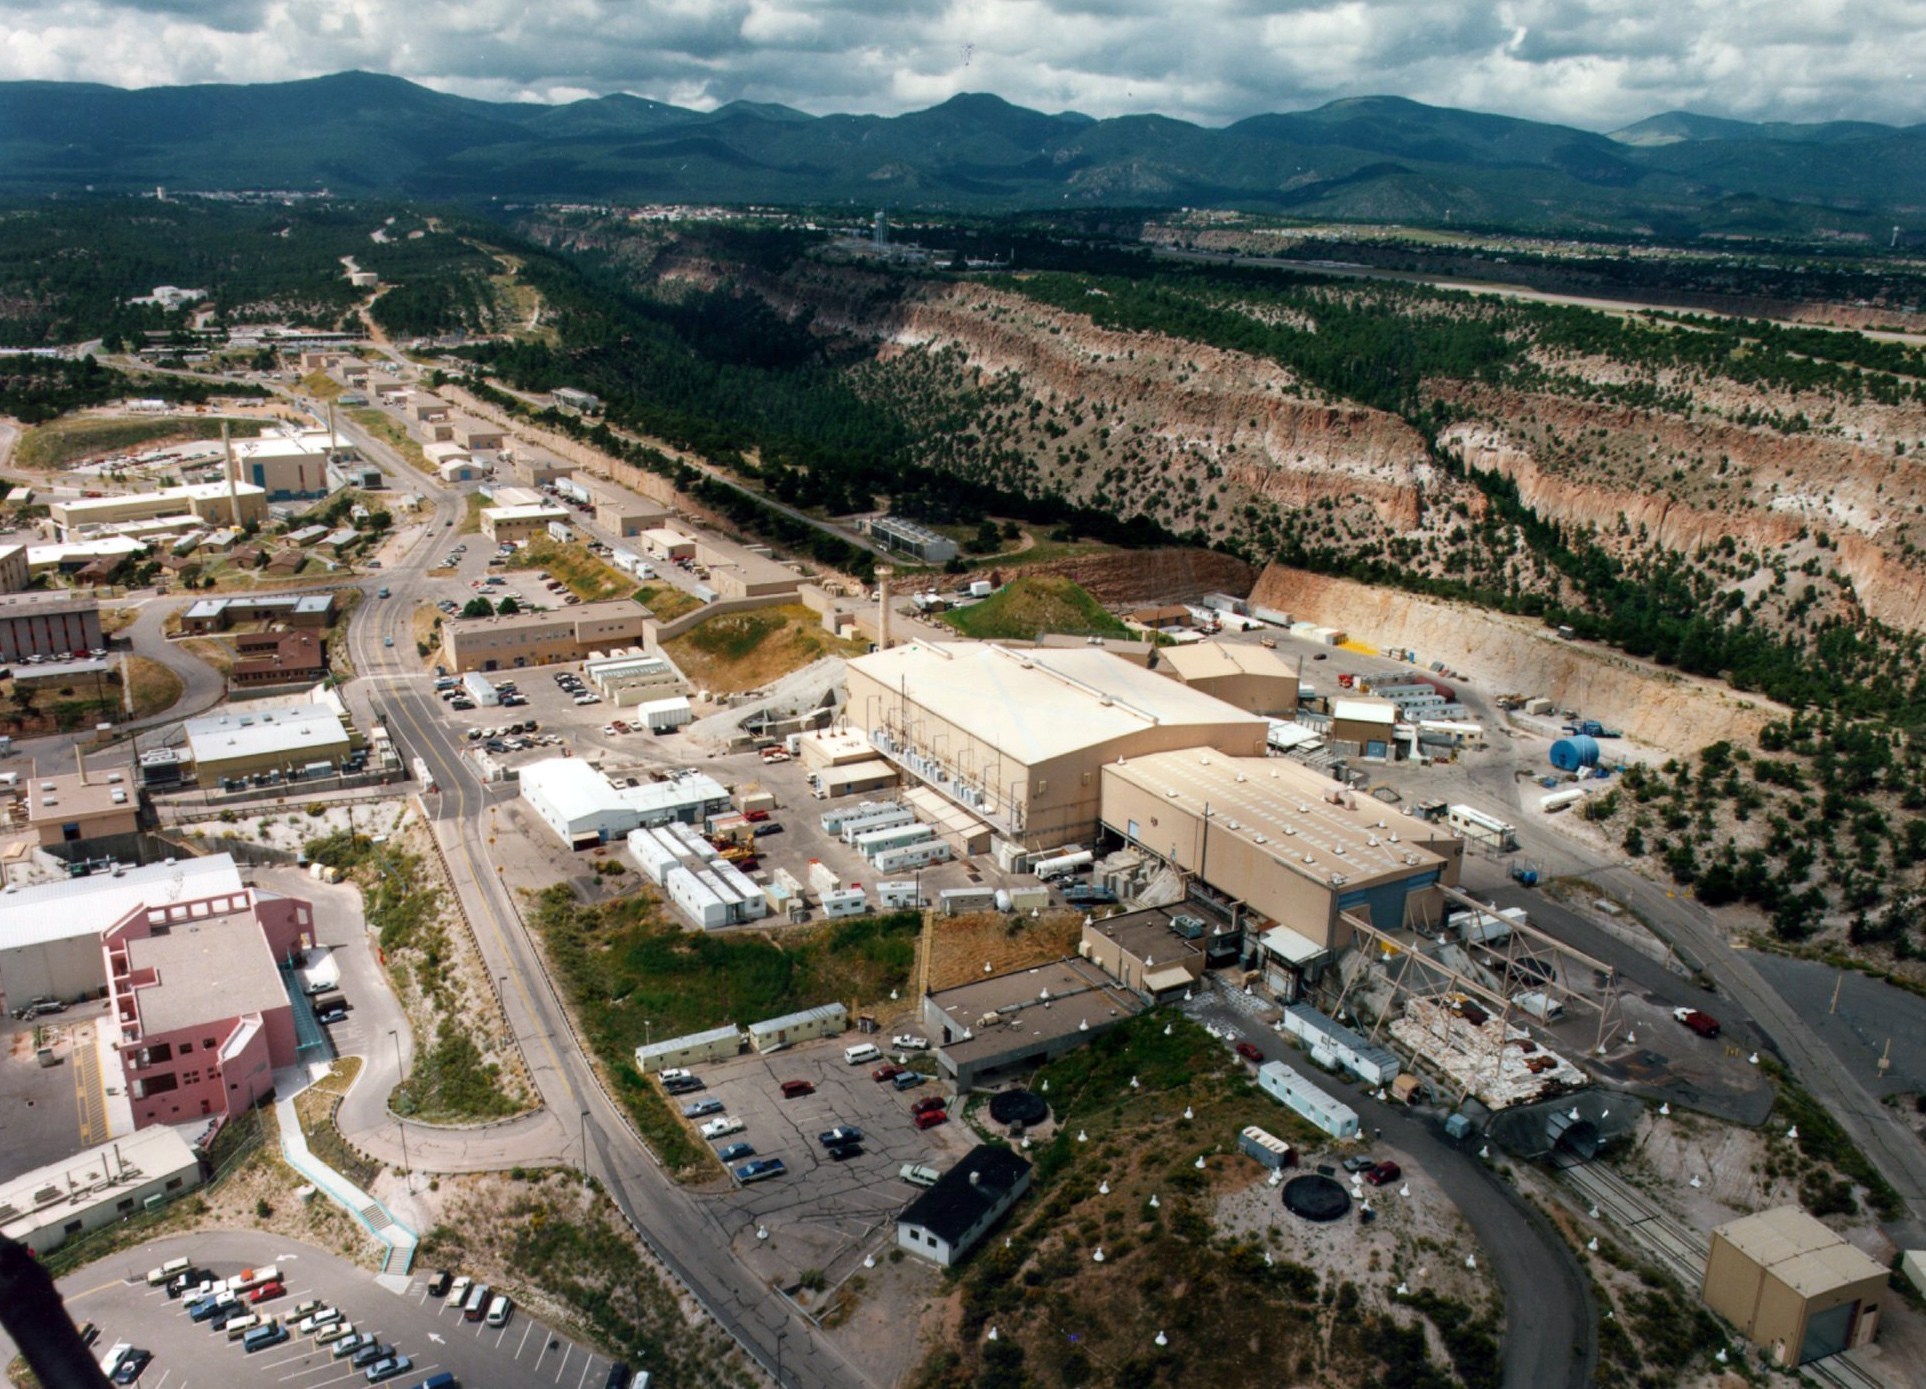 Manhattan Project park to offer tours of Los Alamos site